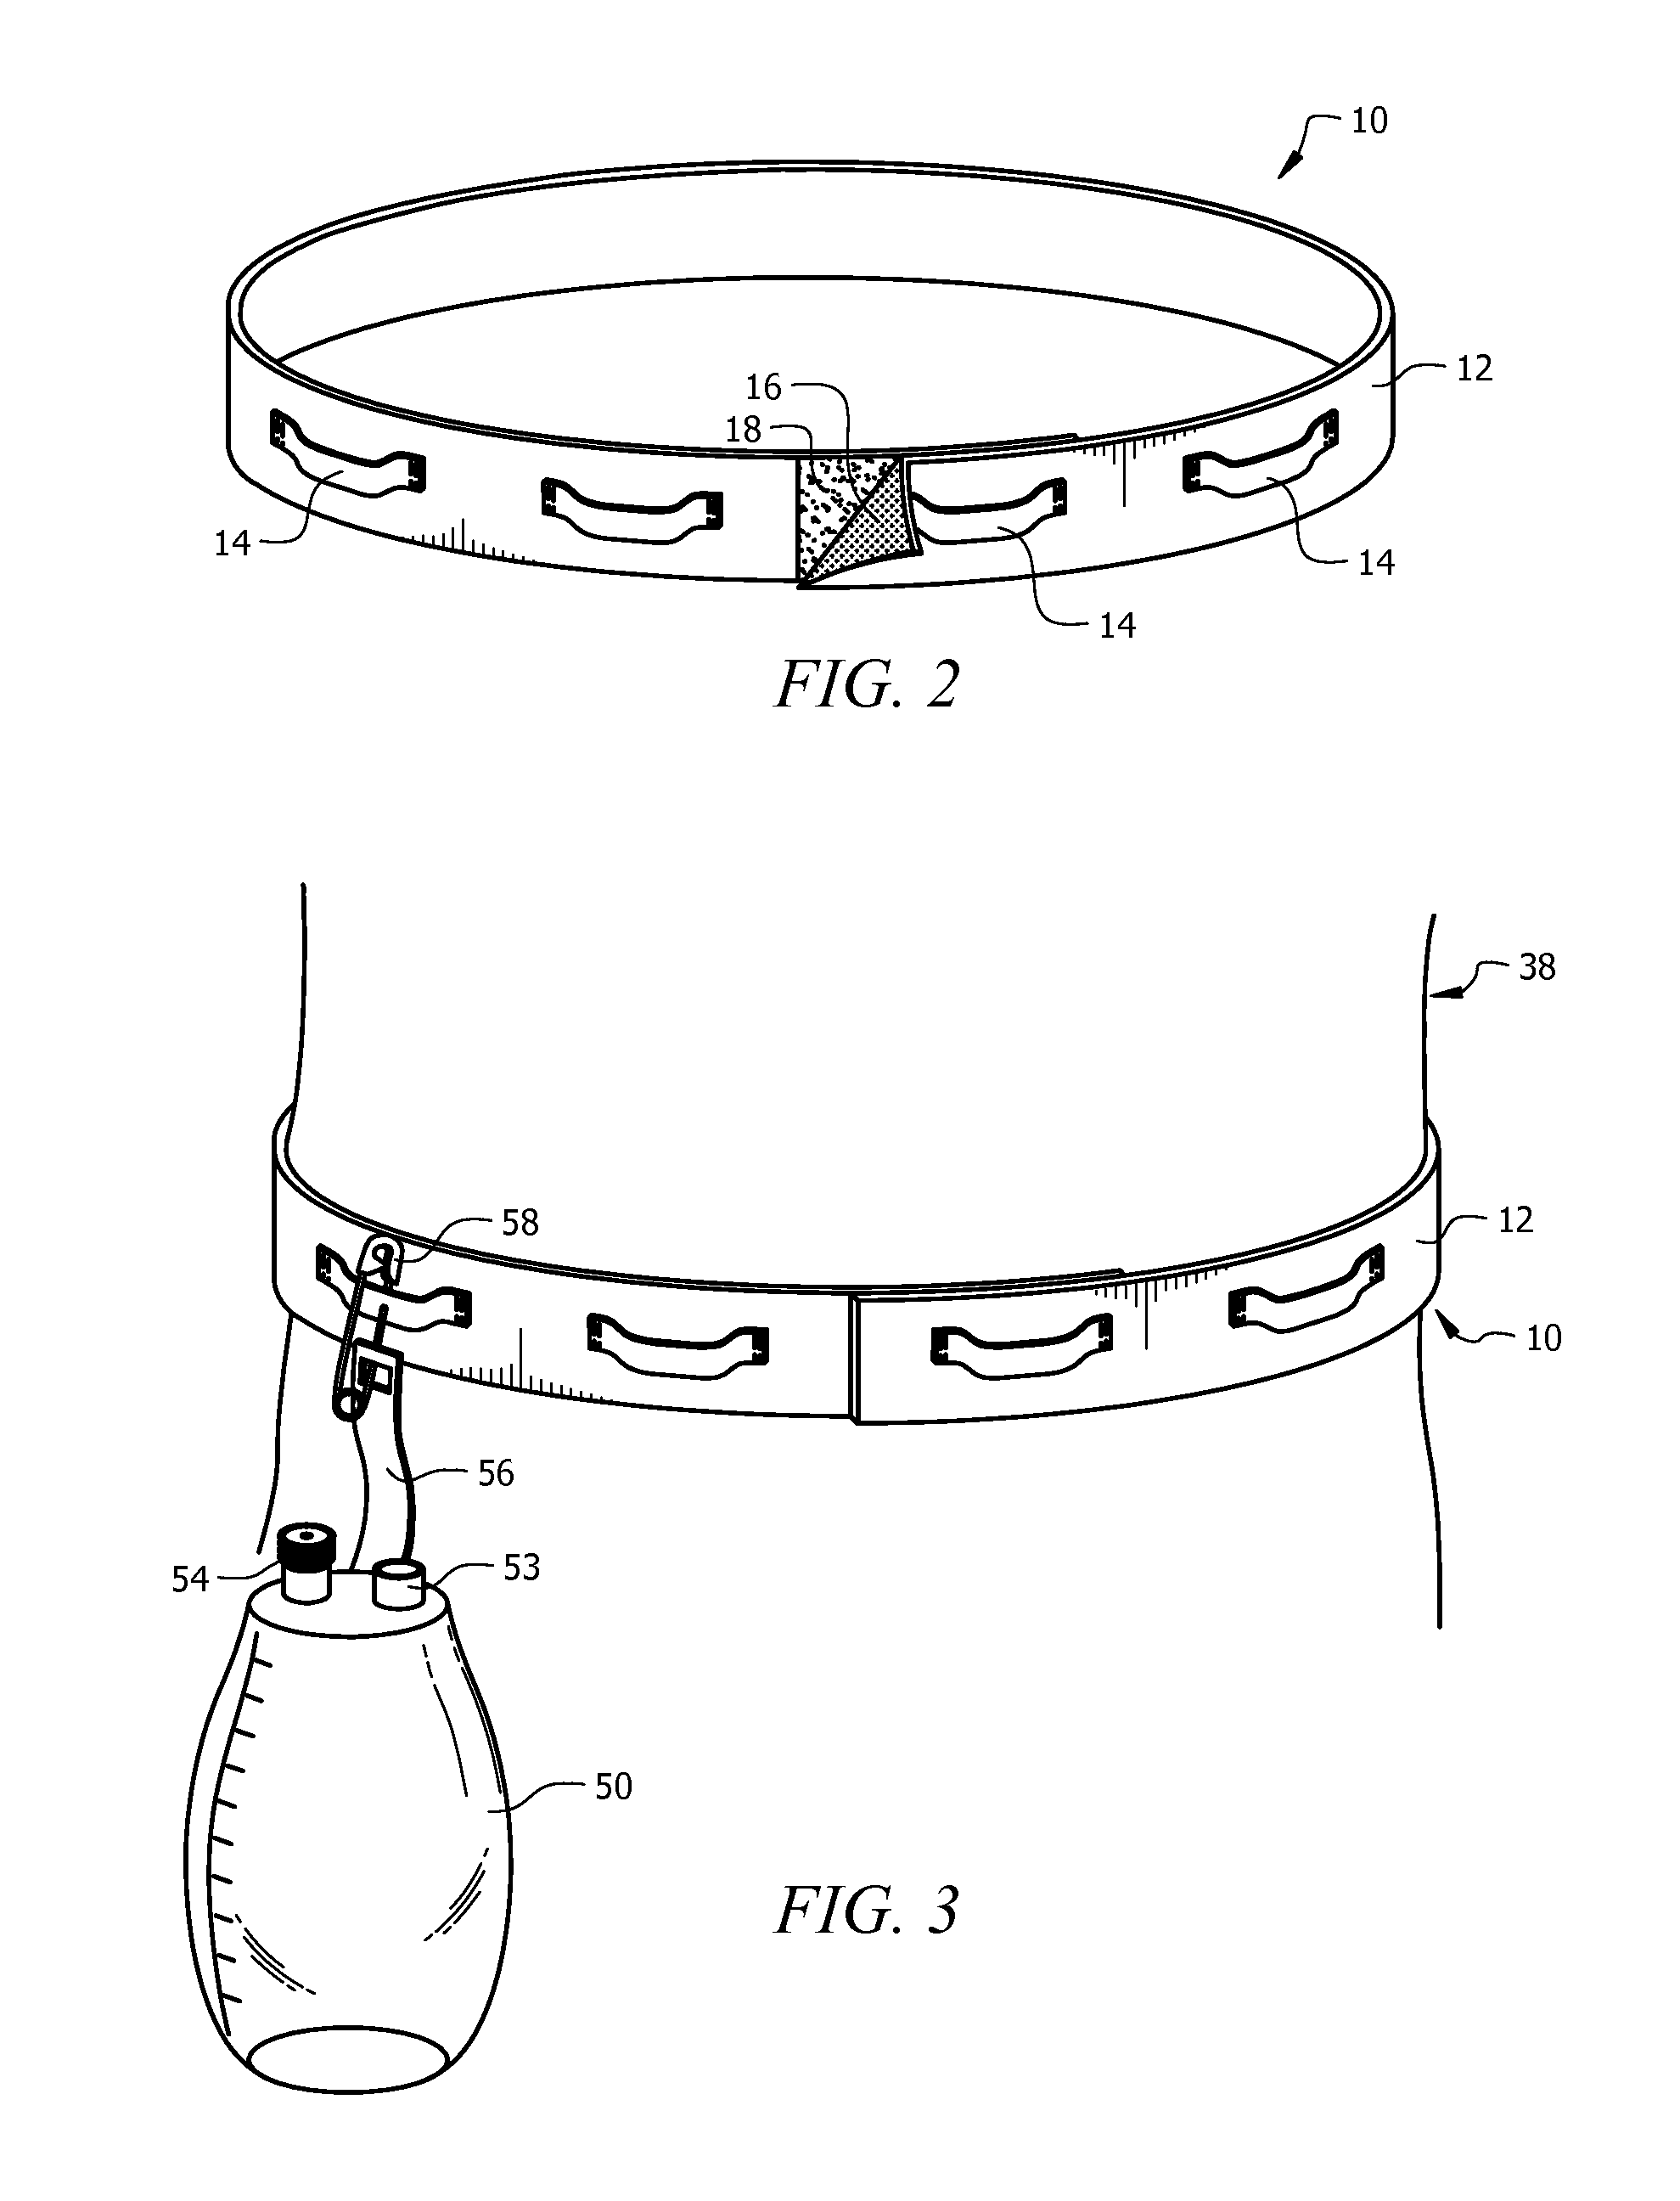 Method and apparatus for supporting a drainage bag